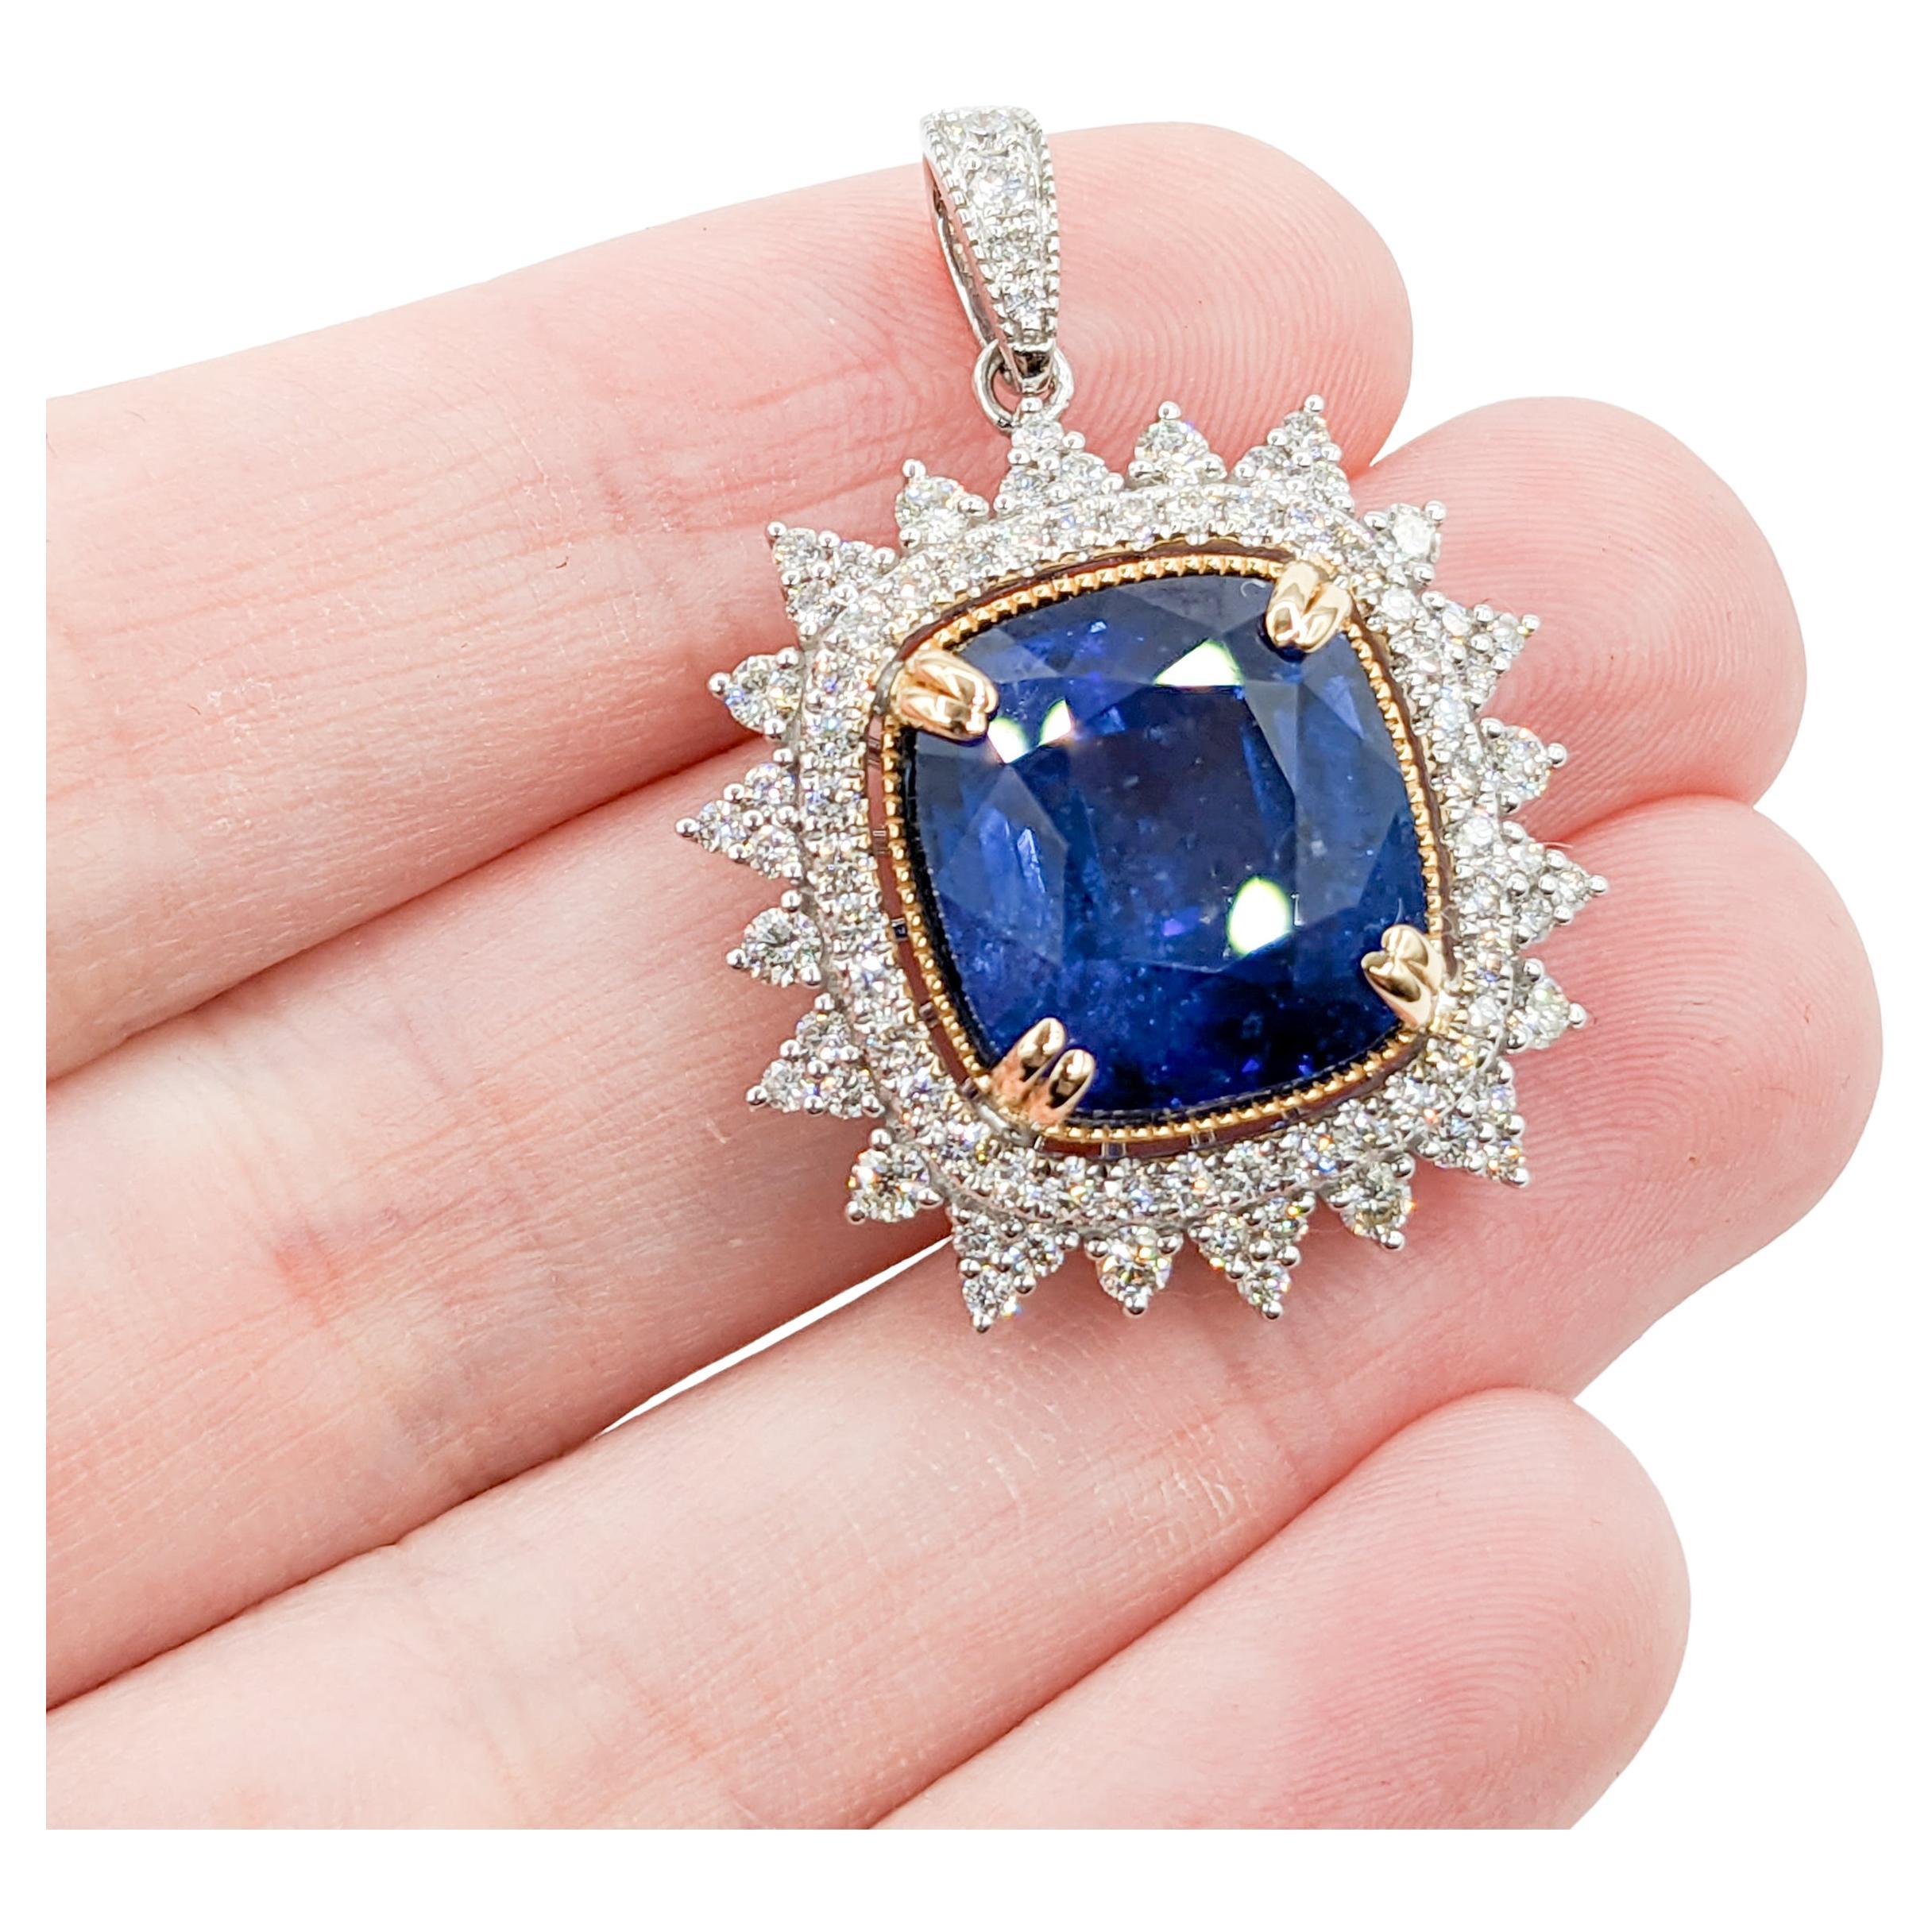 Stunning 14.2ct Sapphire Pendant with Diamond Halo in 14kt White Gold